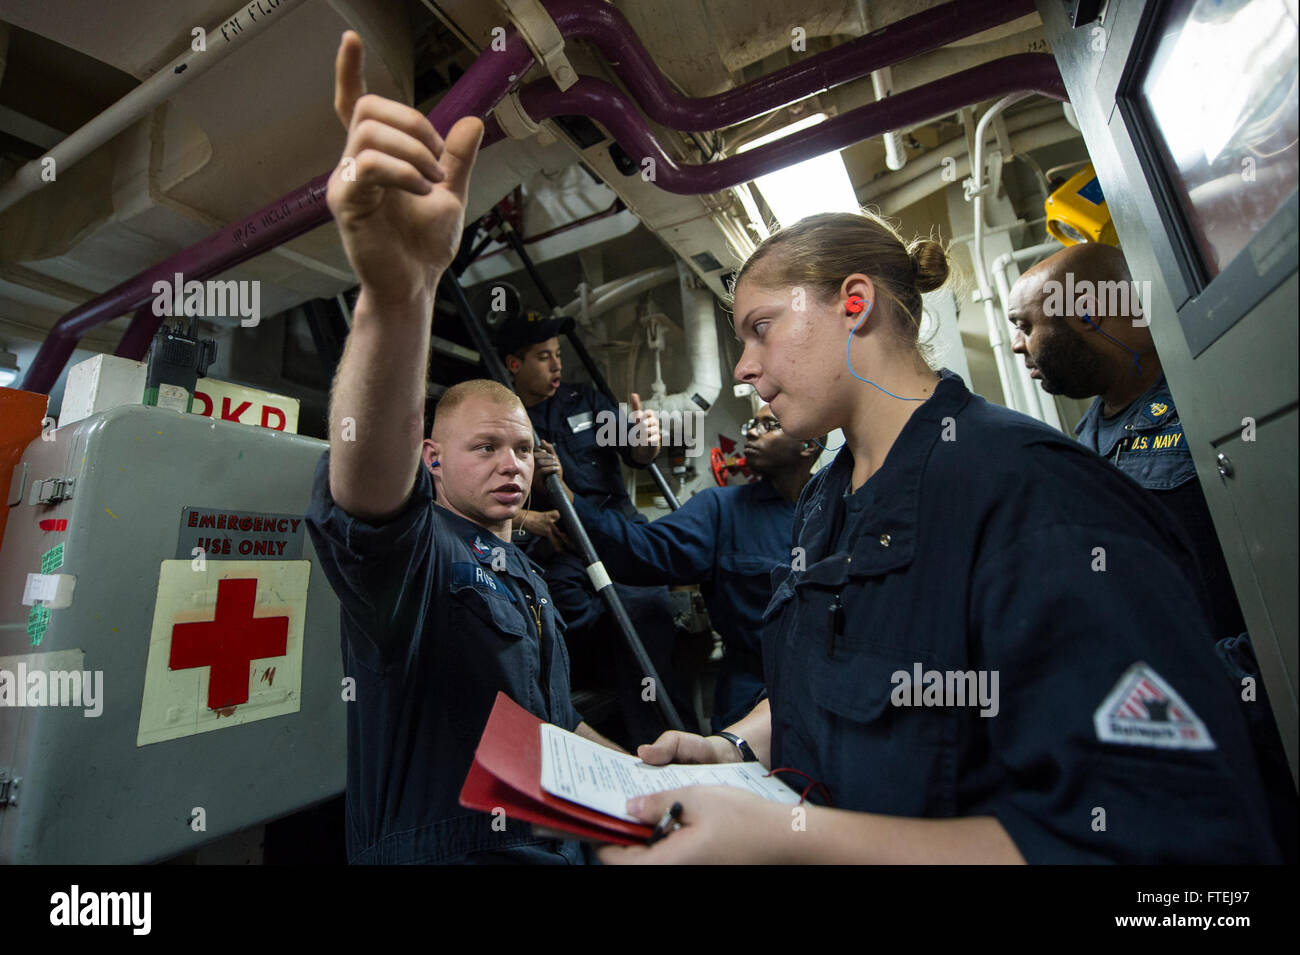 MEDITERRANEAN SEA (Nov. 14, 2014) – Machinist Mate 2nd Class Nicholas Ross, from Rochester, New York, explains the importance of delegation of steps to other engineers during an emergency shut down to Gas Turbine System Mechanical Fireman Samantha Stapp, from Olathe, Kansas, during an engineering drill aboard USS Cole (DDG 67). Cole an Arleigh Burke-class guided-missile destroyer homeported in Norfolk, is conducting naval operations in the U.S. 6th Fleet area of operations in support of U.S. national security interests in Europe. Stock Photo